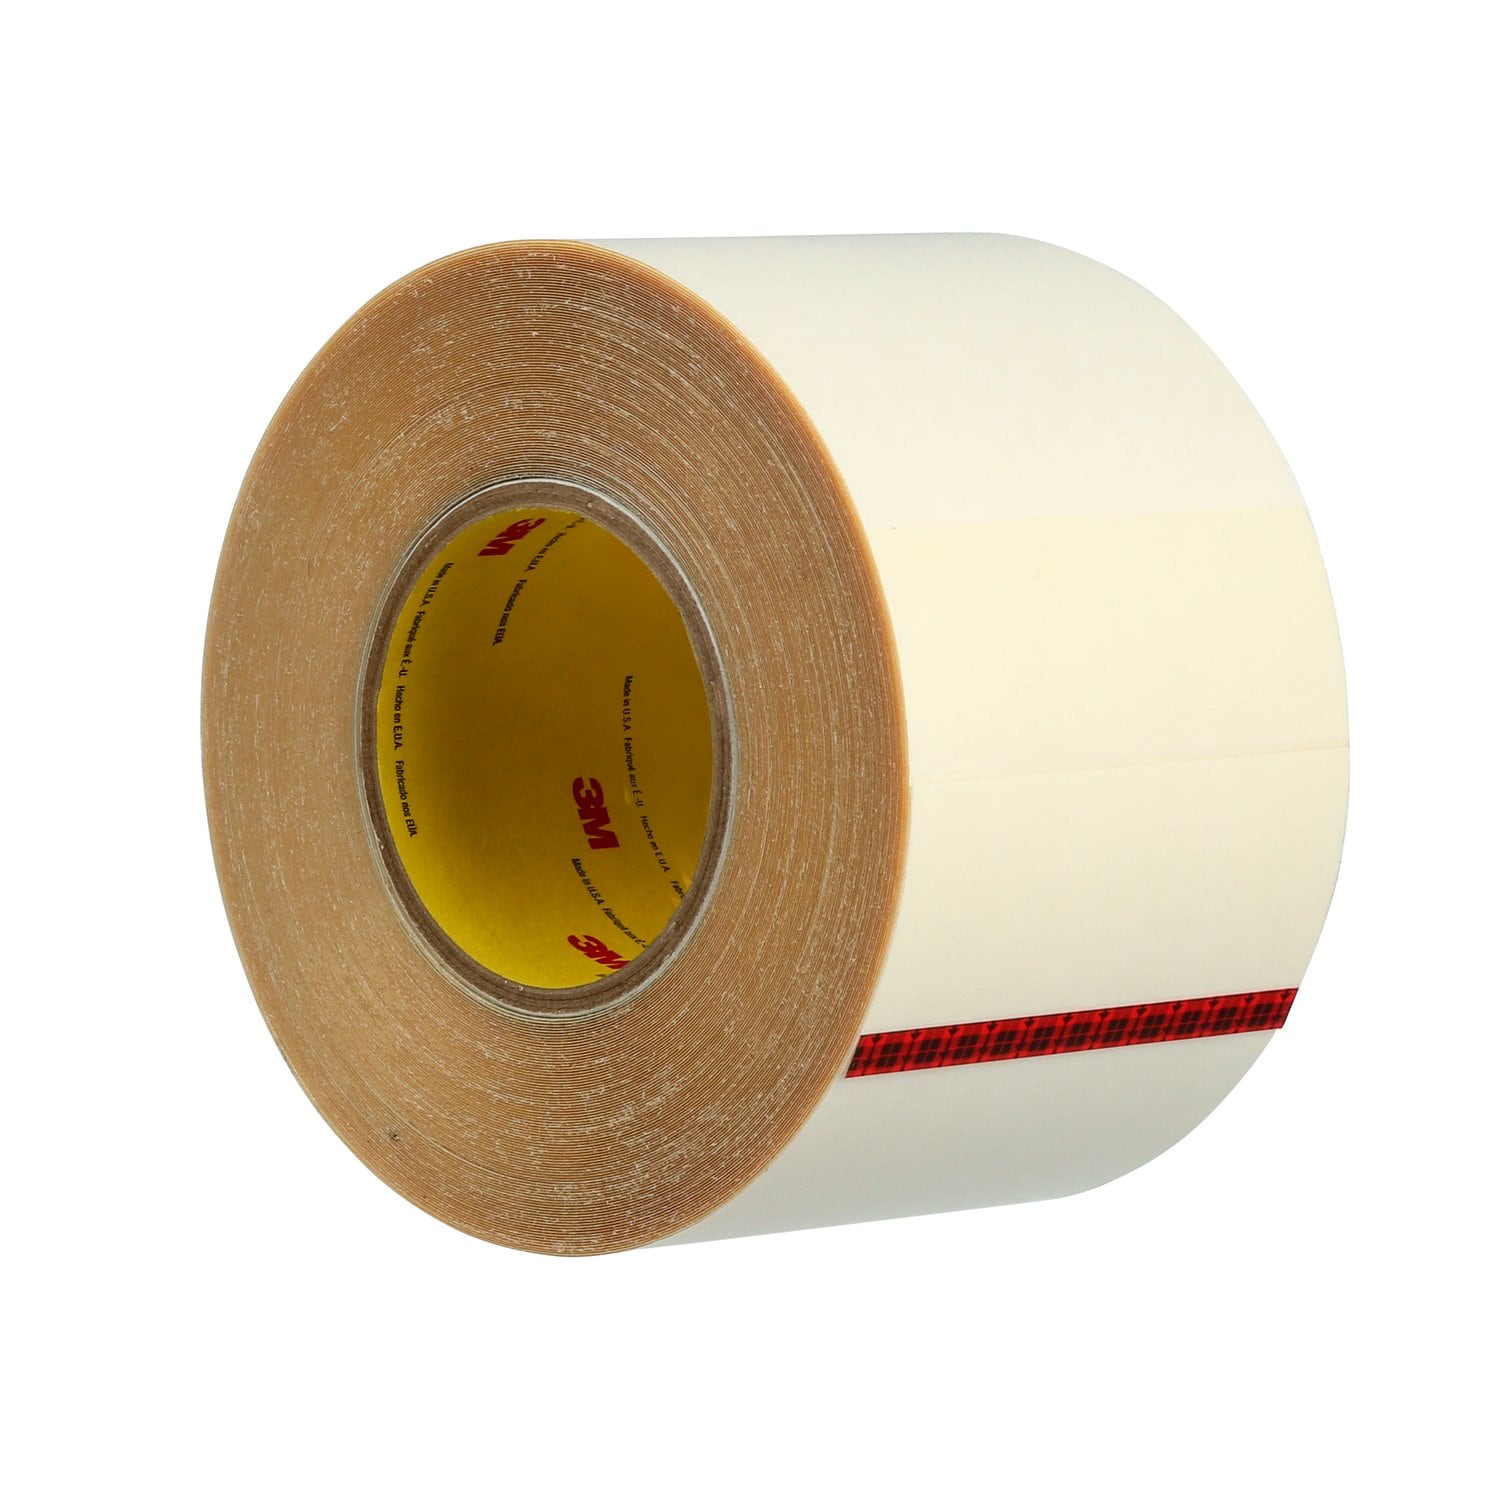 Double Sided Heavy Duty Tape, 0.6 inch Width x 82ft Length Thin Waterproof Mounting Tape, Easy Peel Off Two Sided Tape Foam Tape for LED Strip Lights